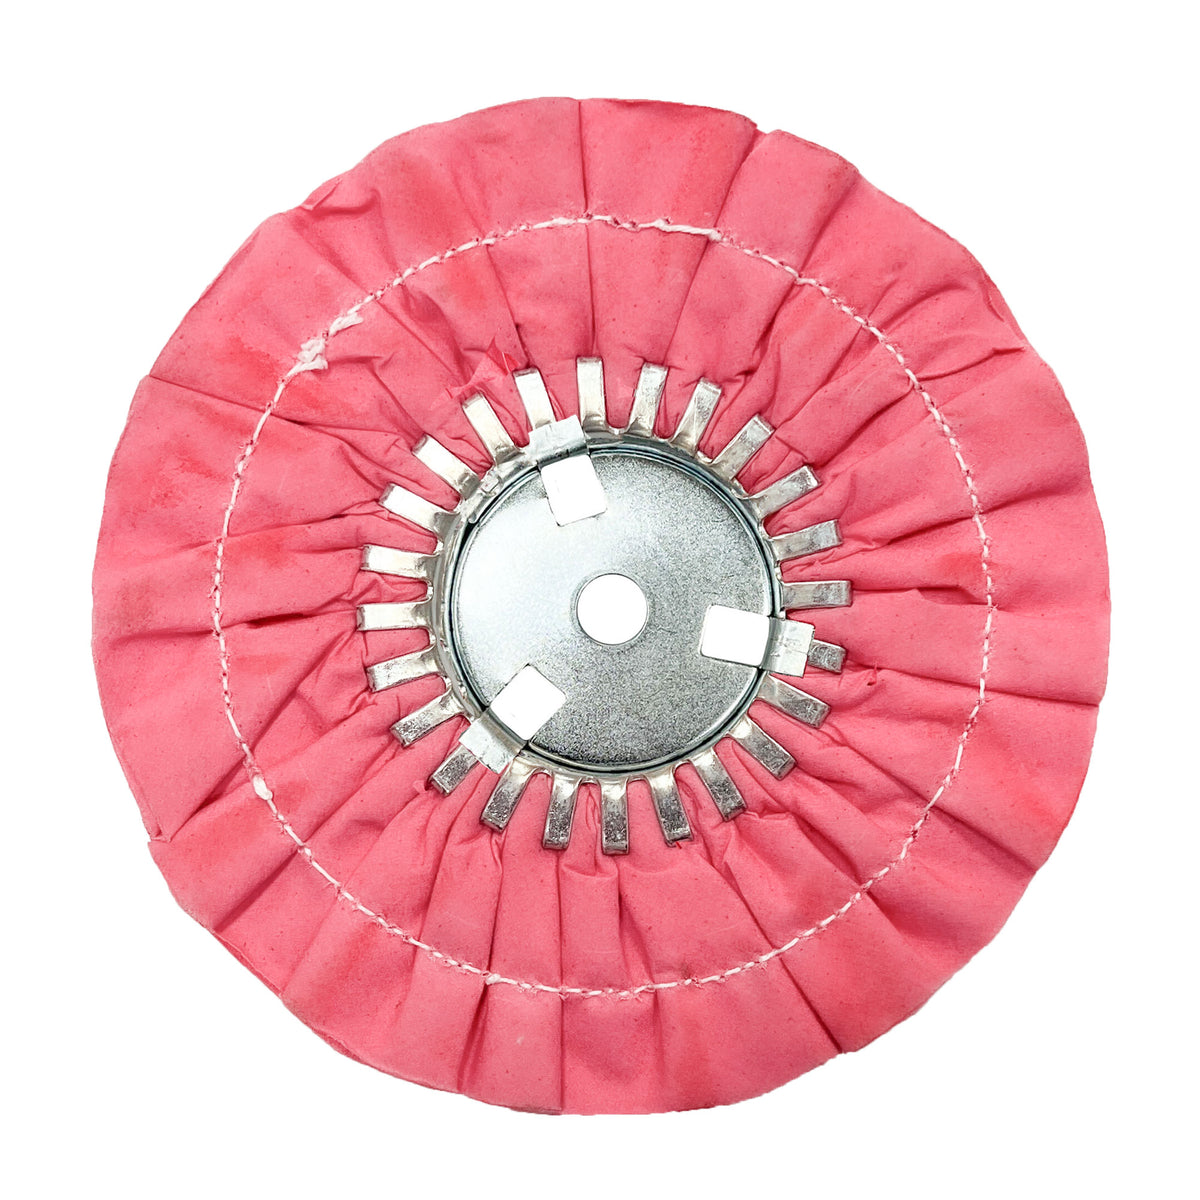 Renegade Products USA&#39;s pink 9&quot; stitched airway buffing wheels with center plate, designed for precision polishing and buffing tasks